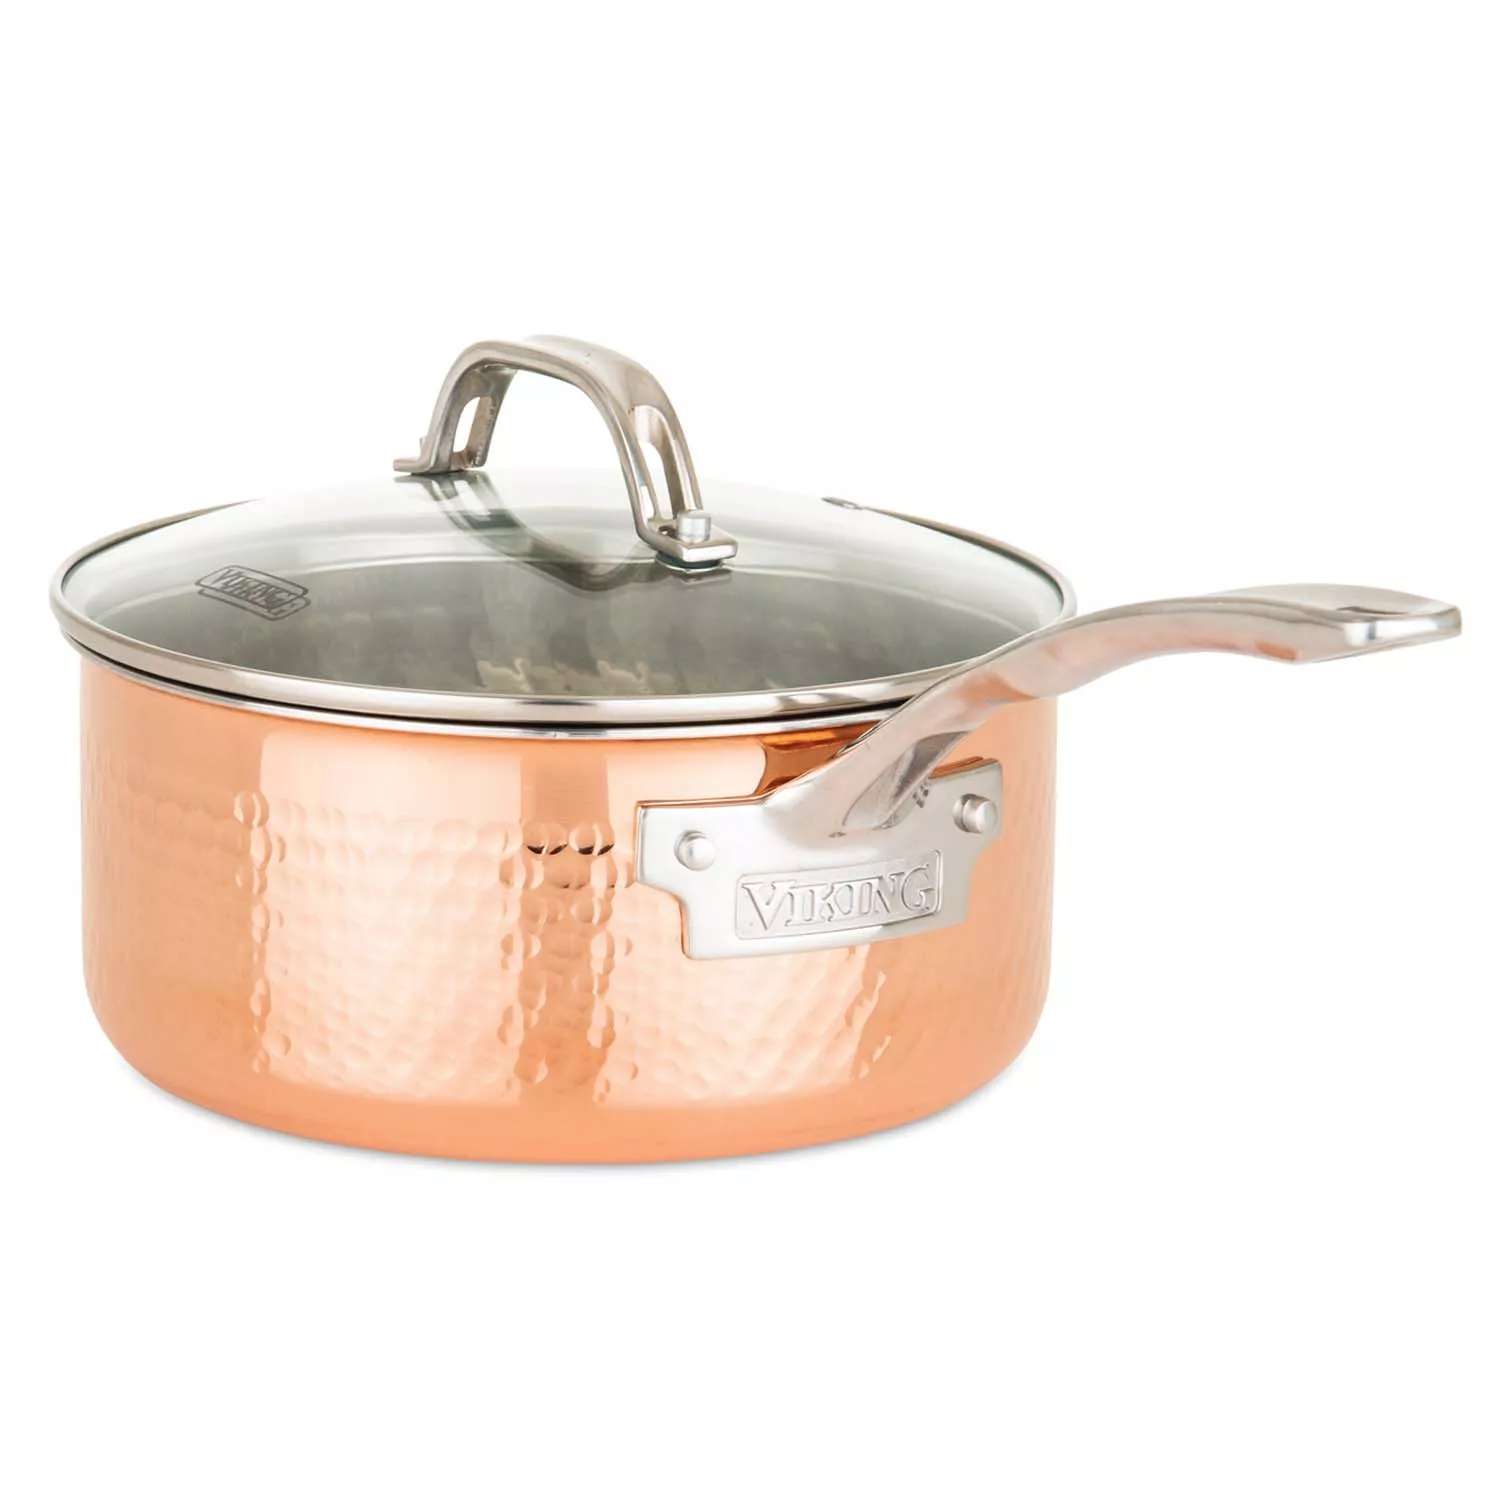 Viking Copper Clad 3-Ply Hammered 10-Piece Cookware Set